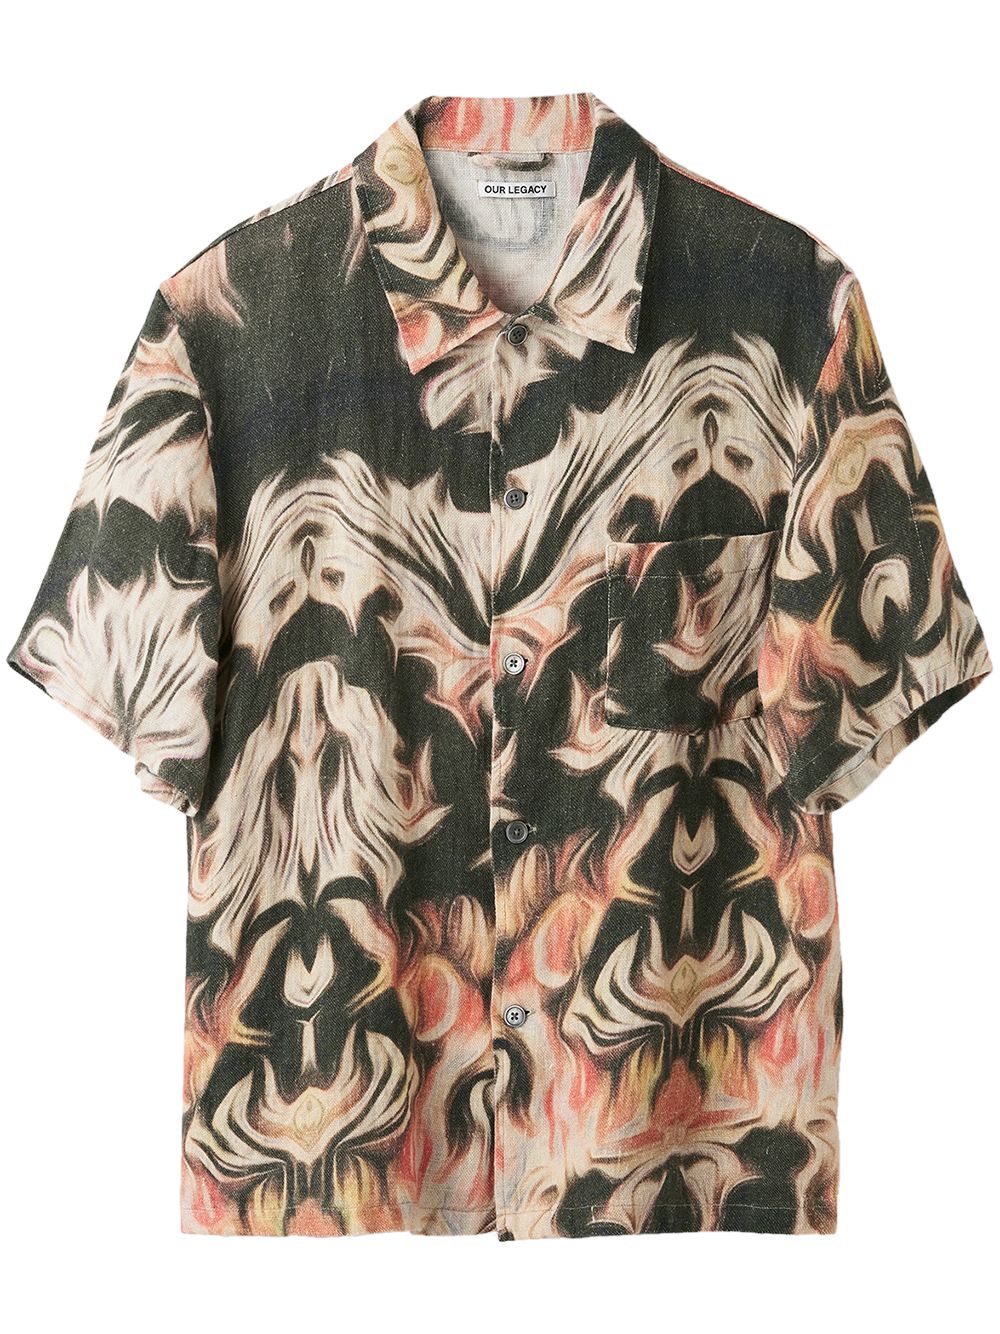 OUR LEGACY Patterned short-sleeve Shirt - Farfetch